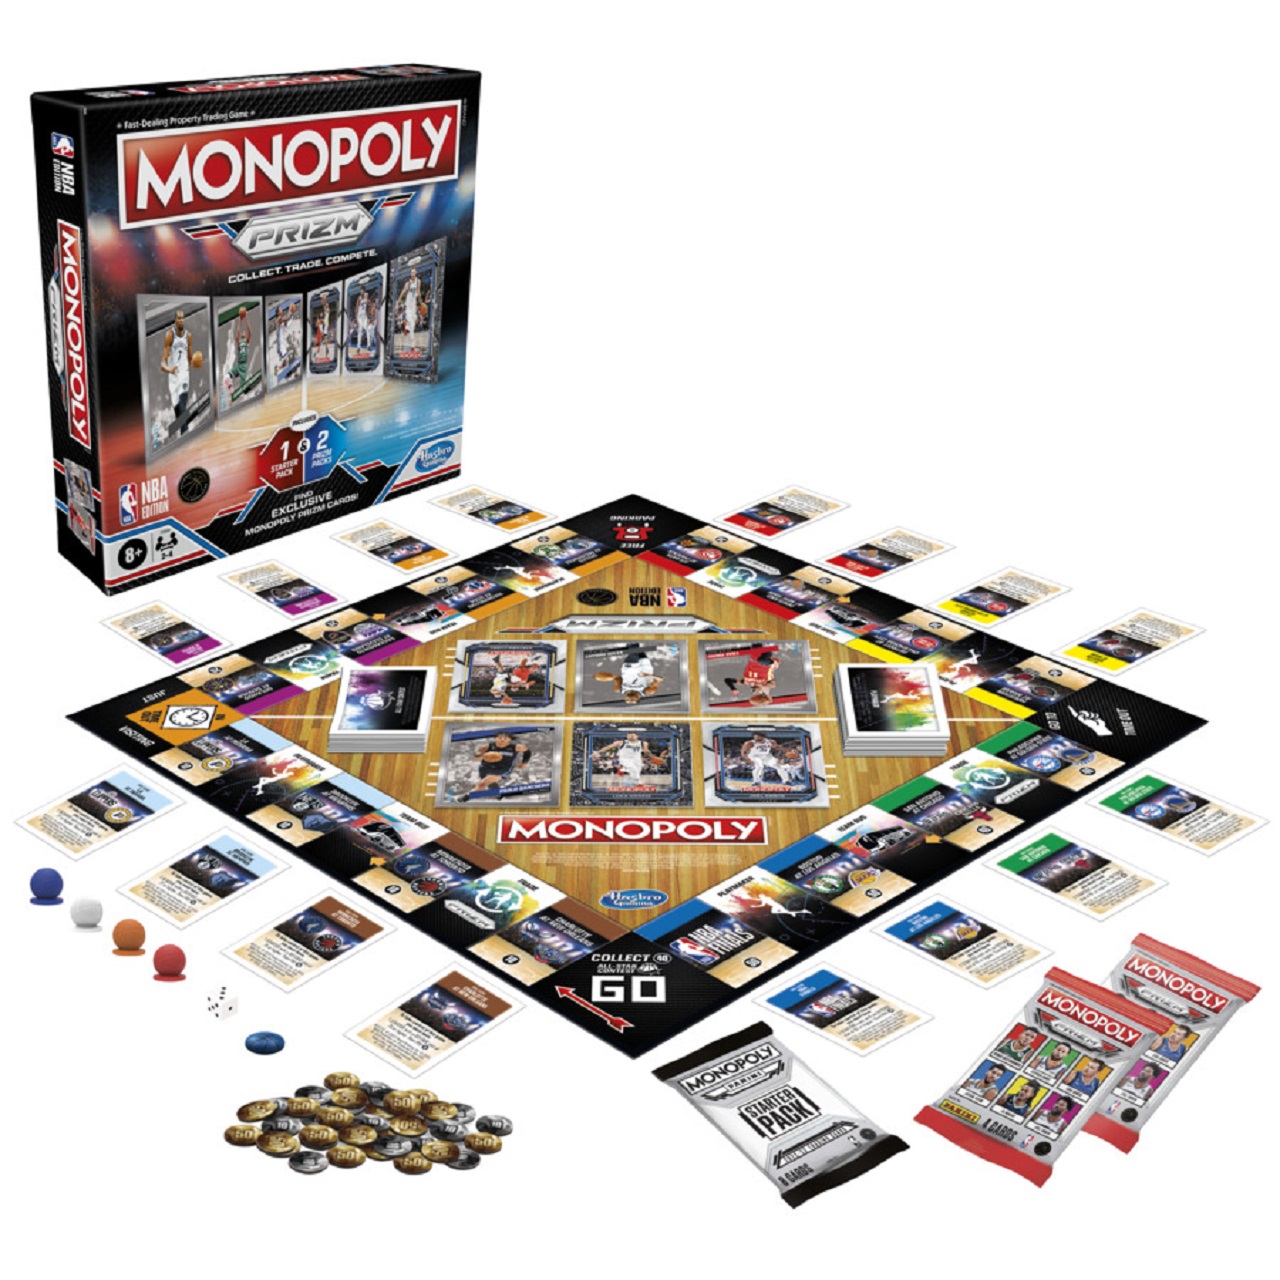 Monopoly Prizm News, Rumors and Information - Bleeding Cool News Page 1